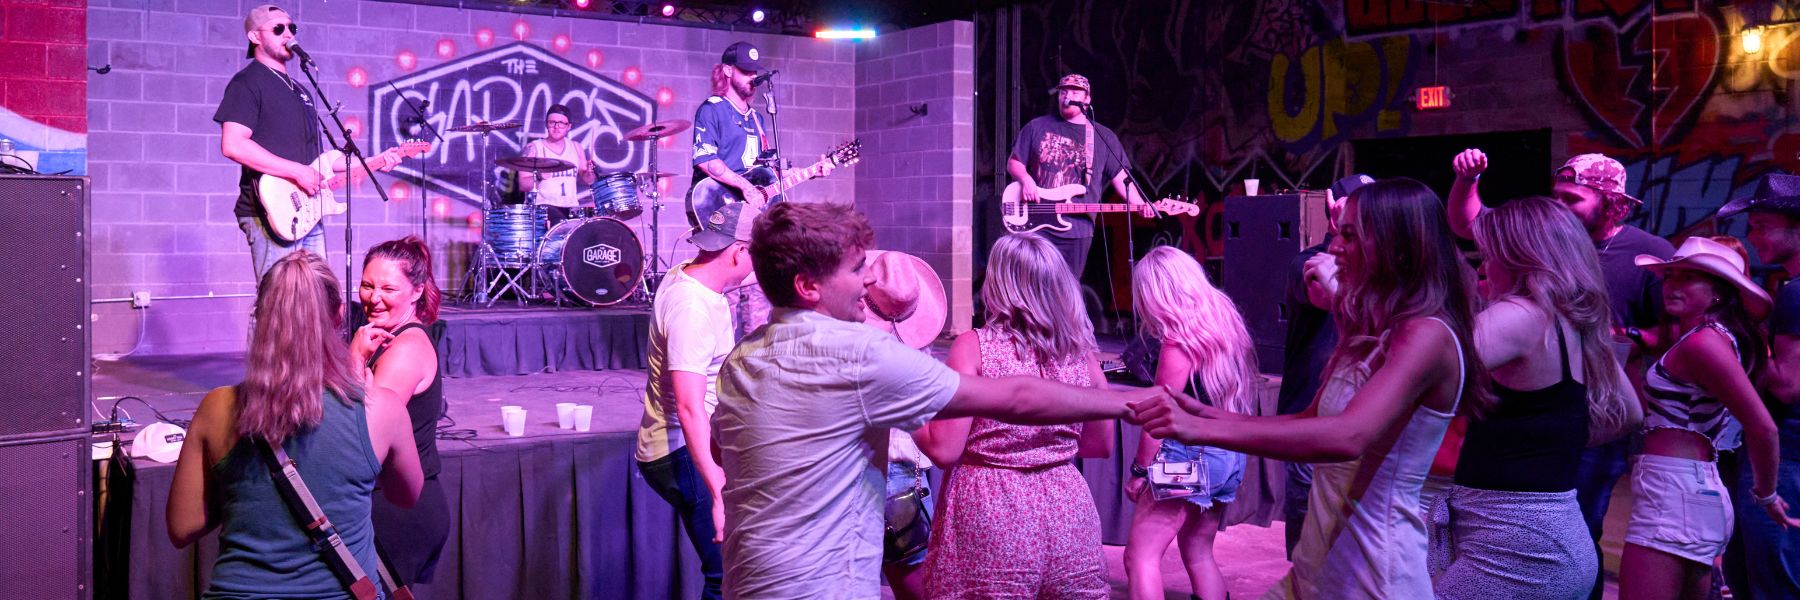 Country music fans dance at The Garage in downtown St. Louis.